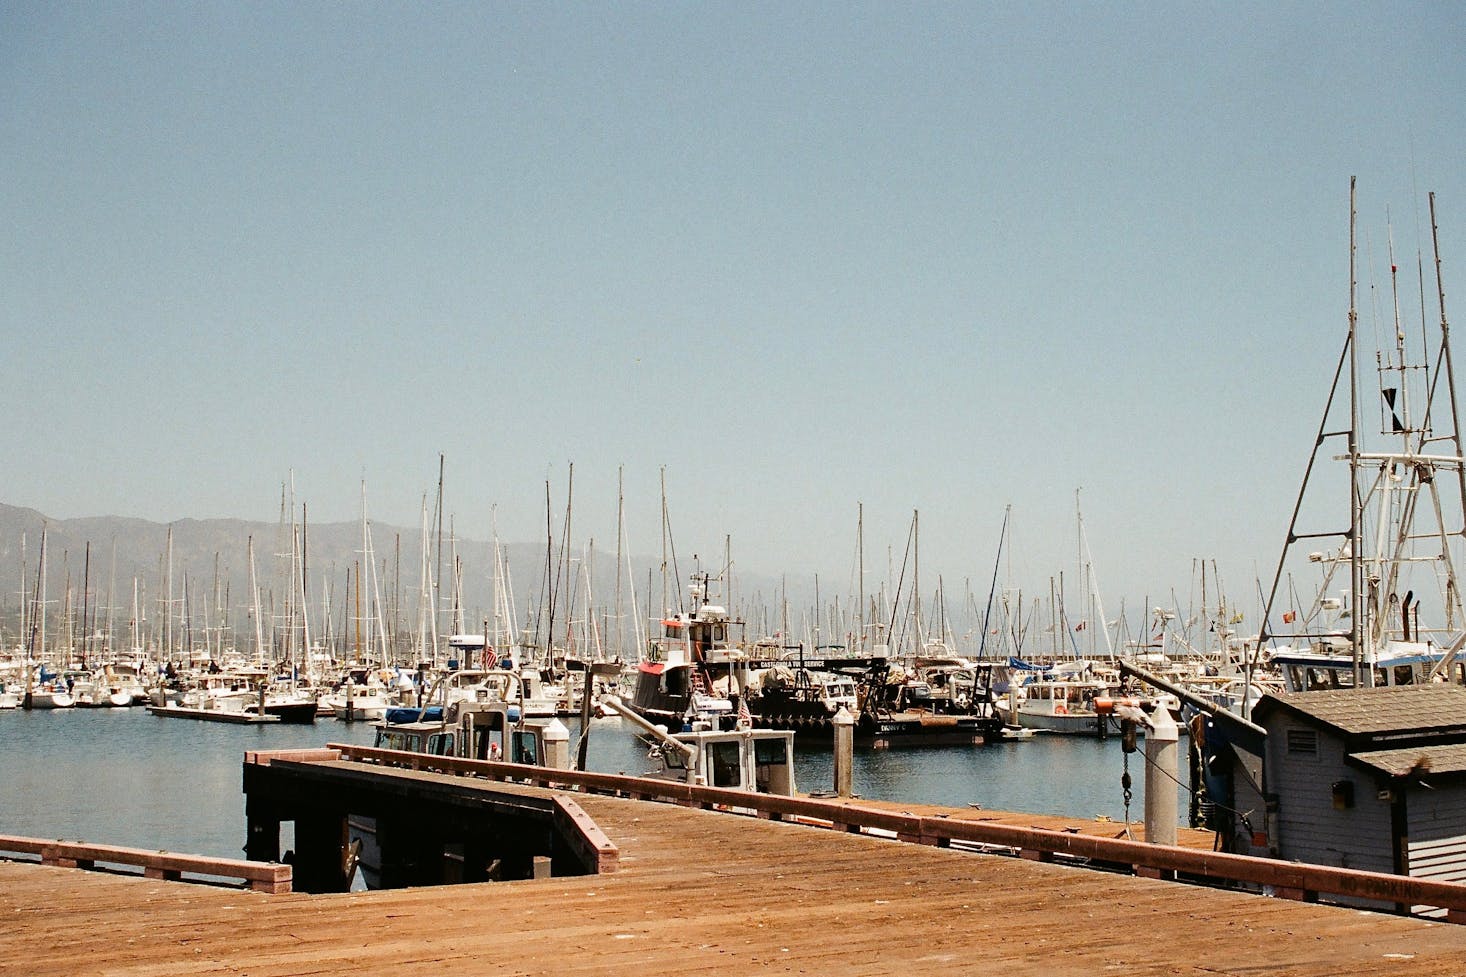 sailboats in a harbor